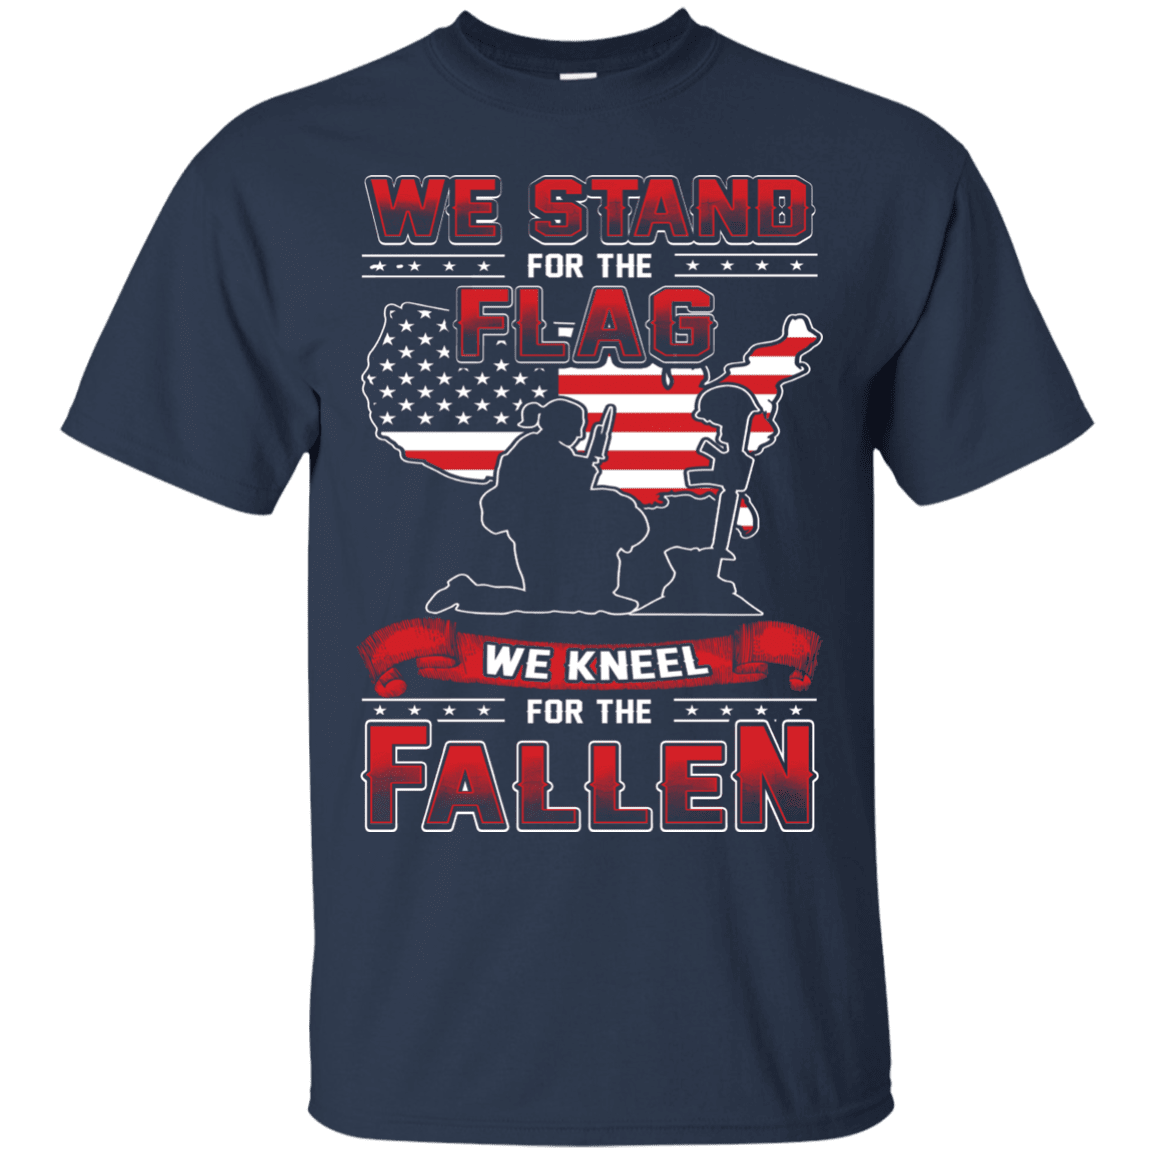 Military T-Shirt "We Stand For The Flag Knell For The Fallen Female Veteran" Front-TShirt-General-Veterans Nation